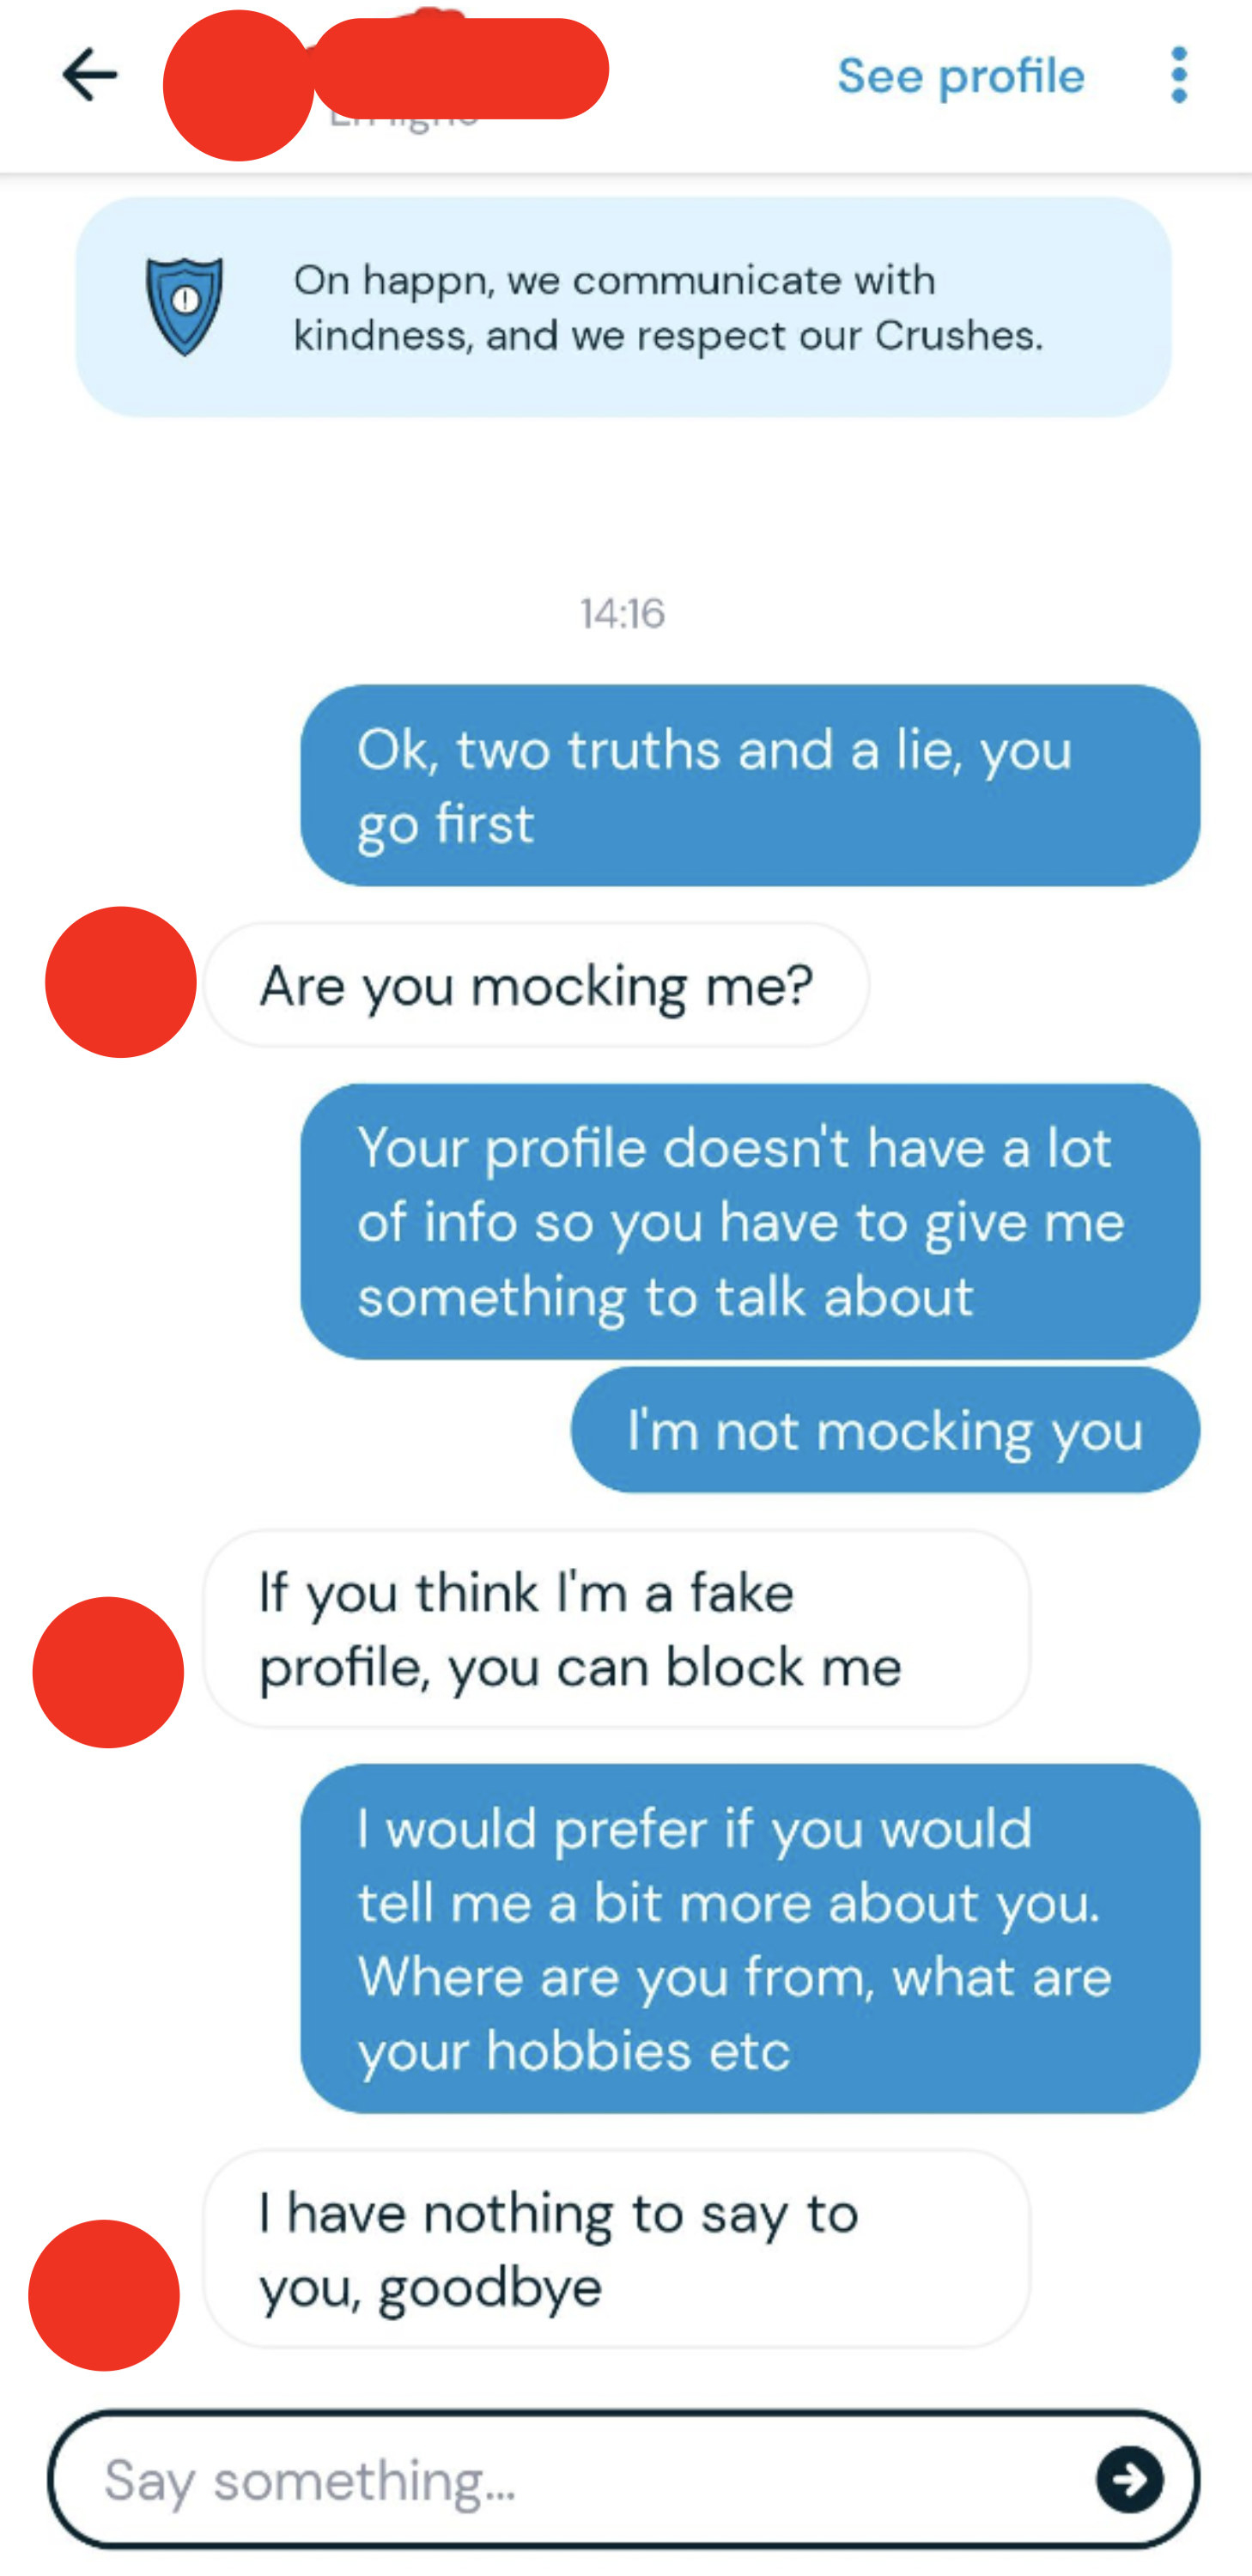 person 1 tries to play 2 truths and a lie but person 2 thinks they&#x27;re mocking them and says if they think they&#x27;re a fake profile they can just unmatch so person 2 says they just want to get to know them since there wasn&#x27;t a lot of info on their profile